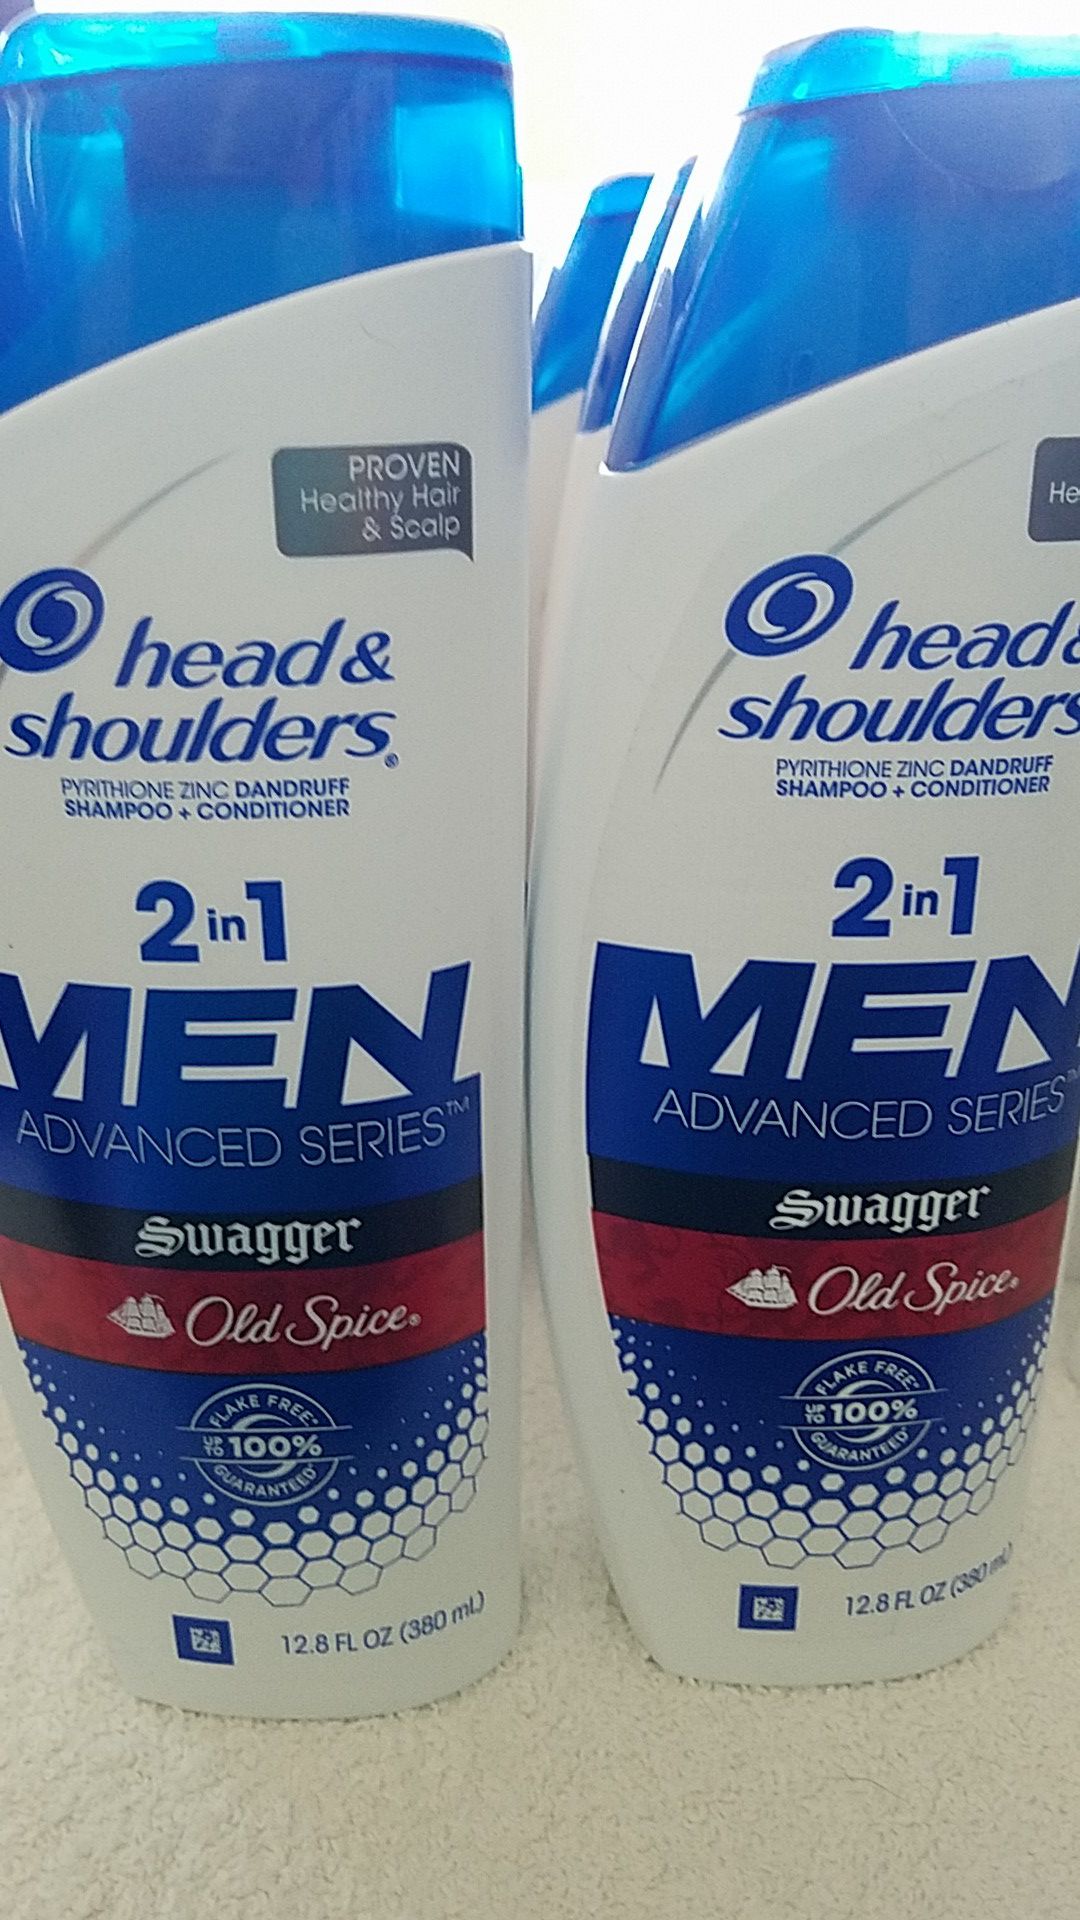 Head & shoulders 2in1 men swagger old spice